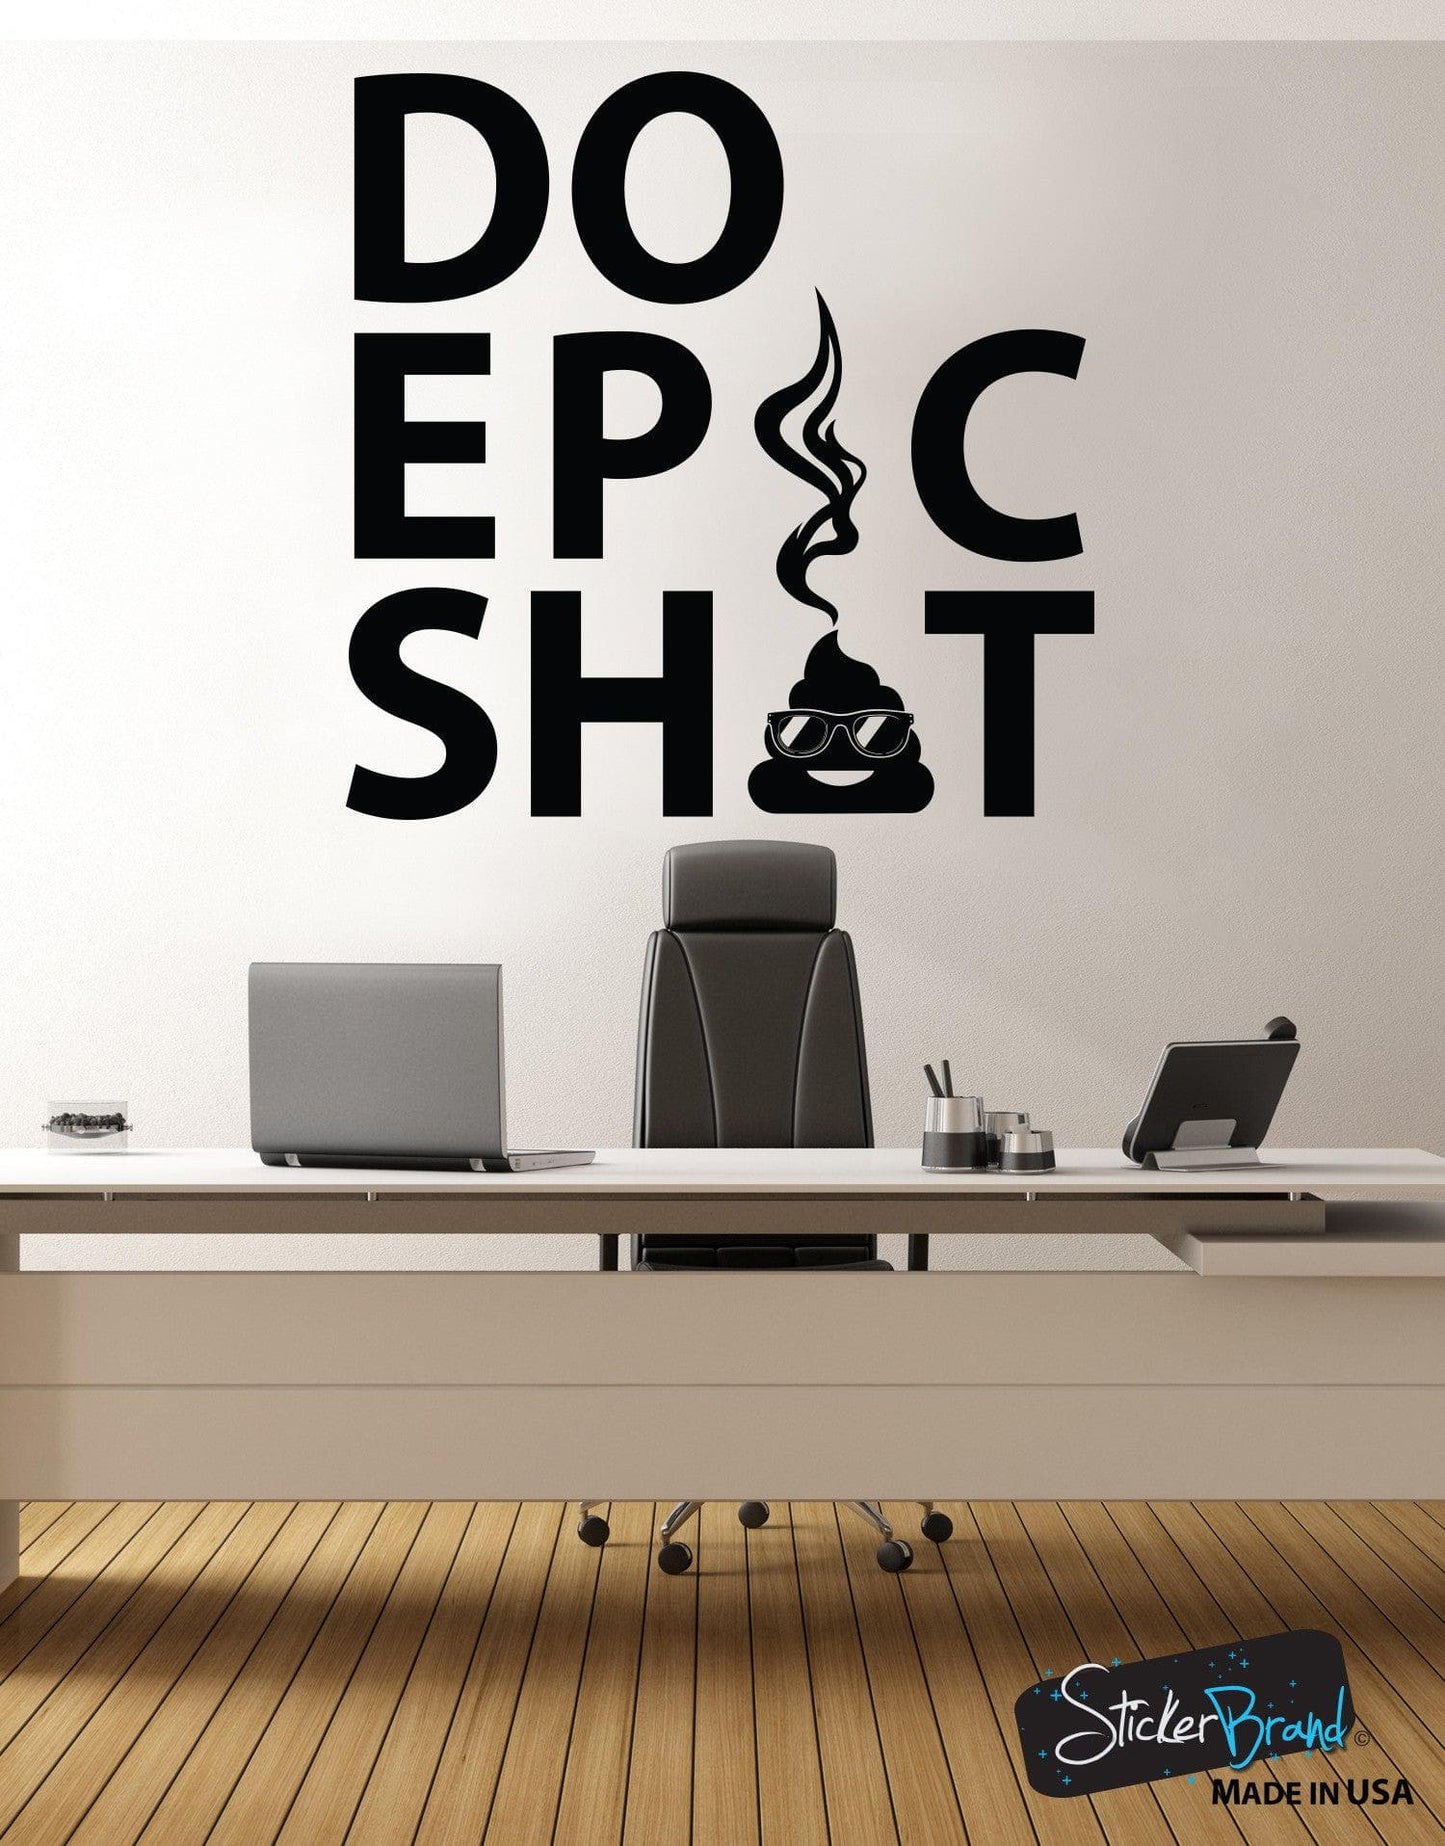 DO EPIC SHIT Motivational Quote Vinyl Wall Decal Sticker #6069